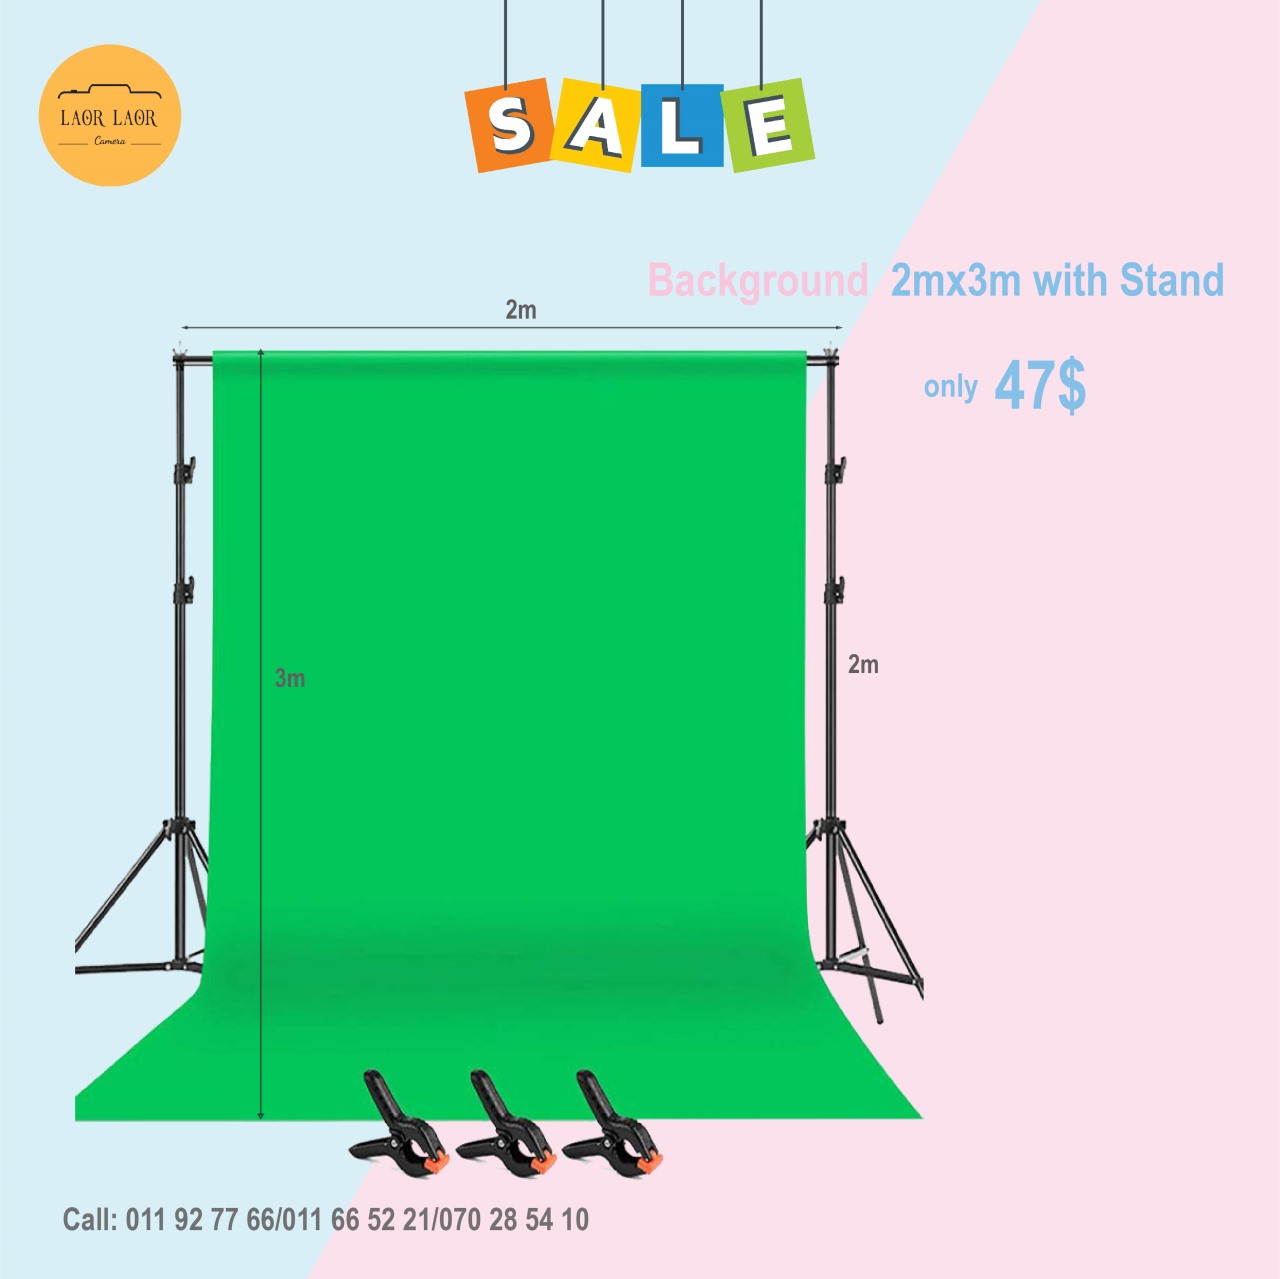 Background Clothes 2mx3m with Stand (Set)